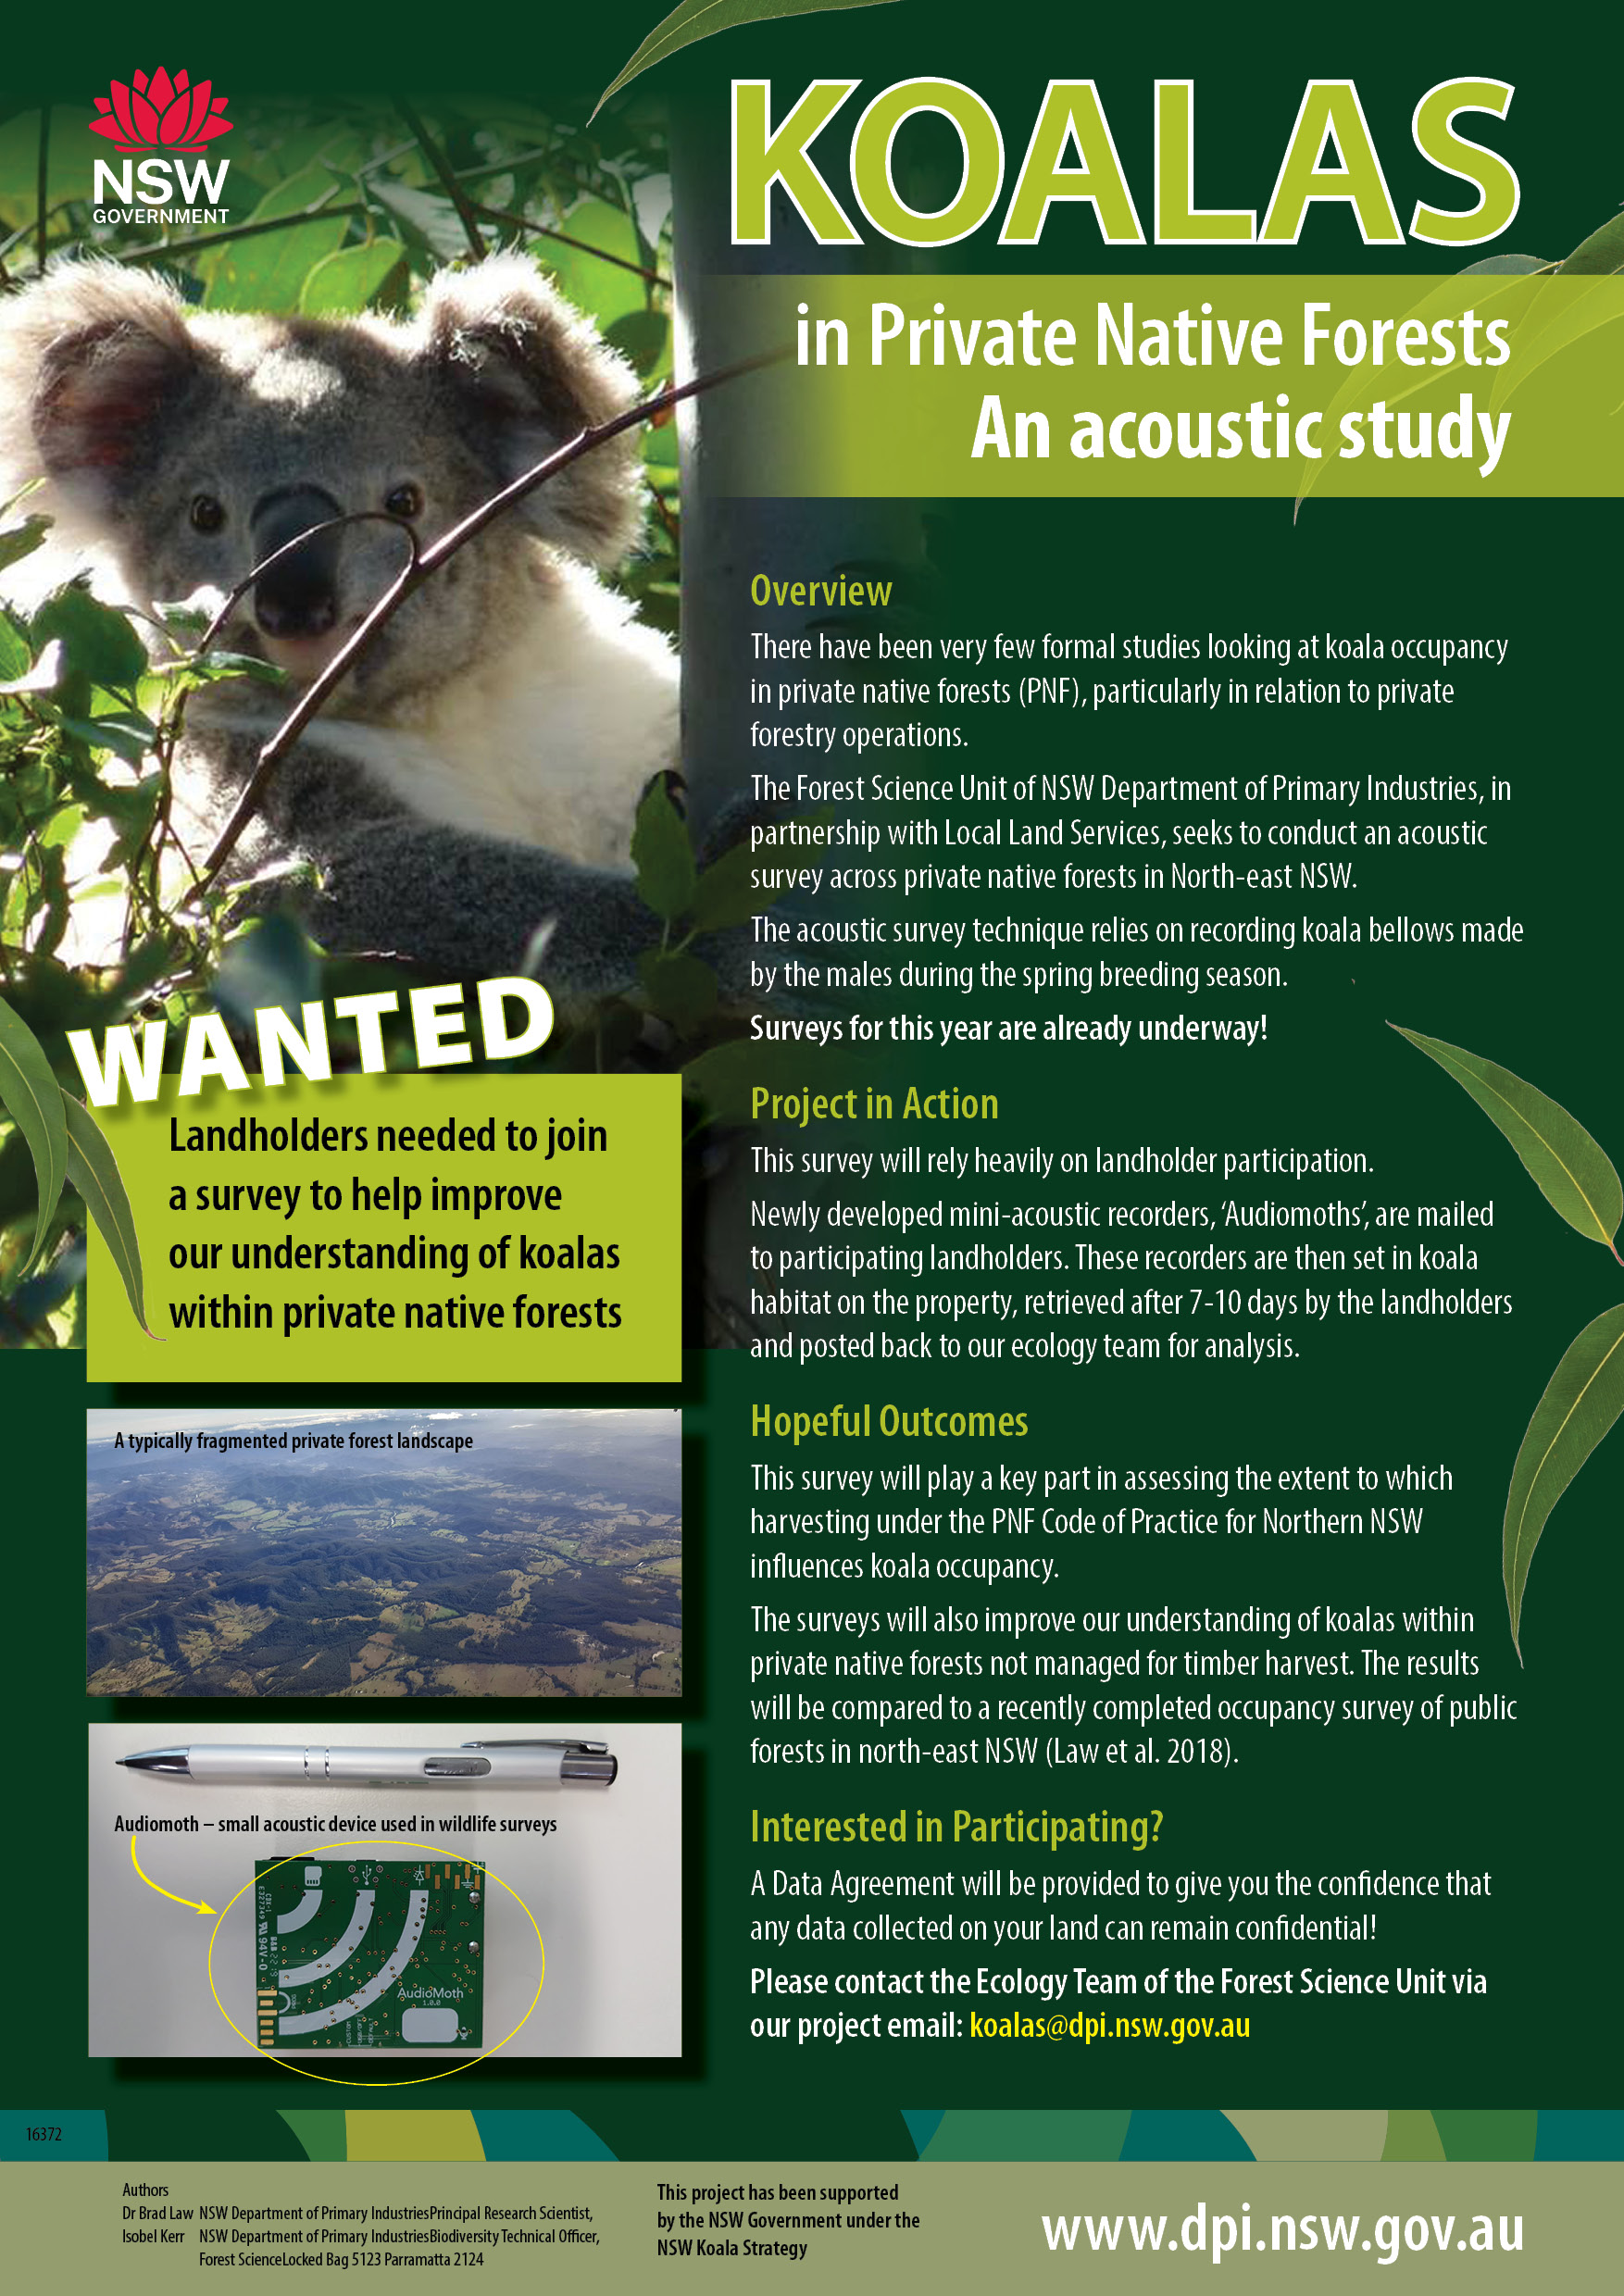 Koalas in Private Native Forests - An acoustic study